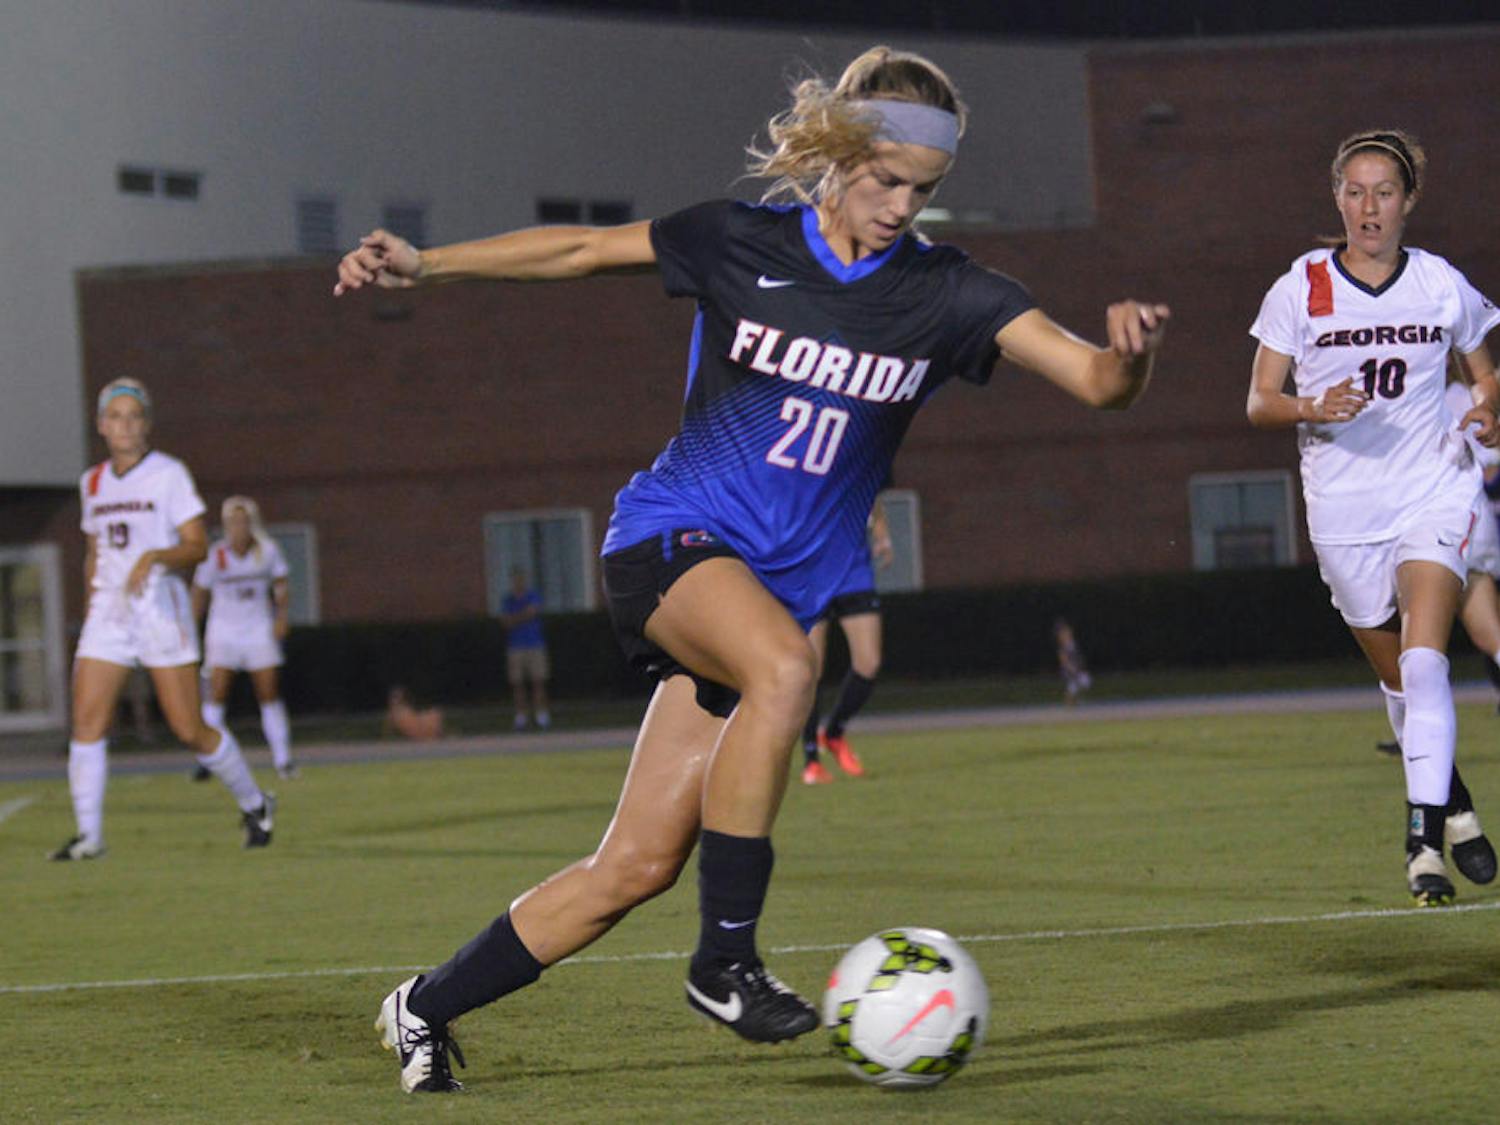 Christen Westphal dribbles the ball during Florida's 2-1 win against Georgia at James G. Pressly Stadium.